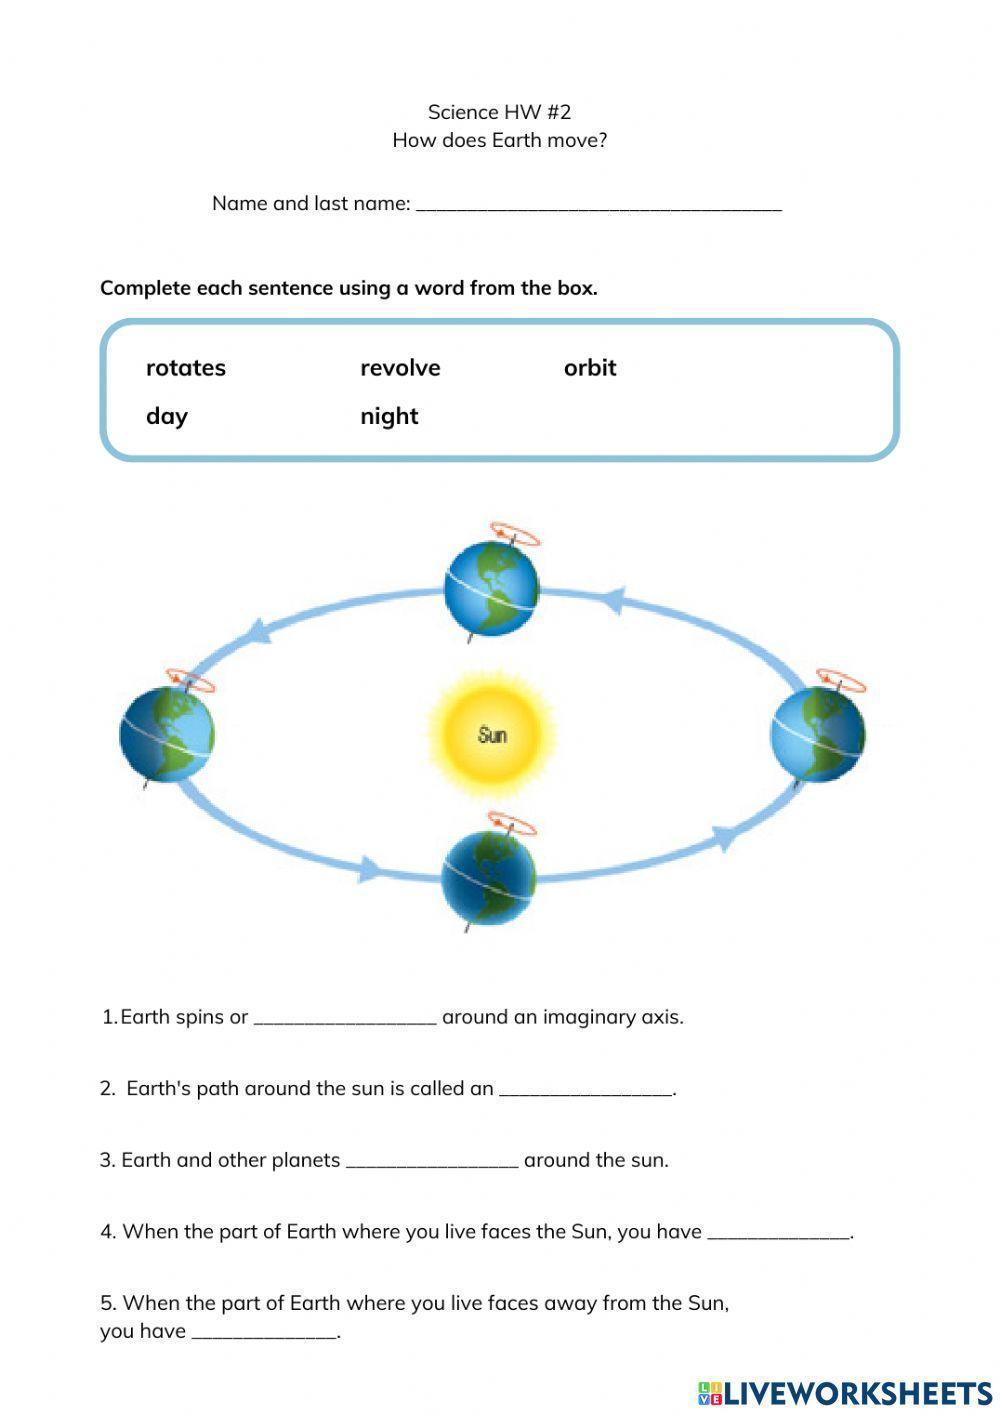 How does Earth move?